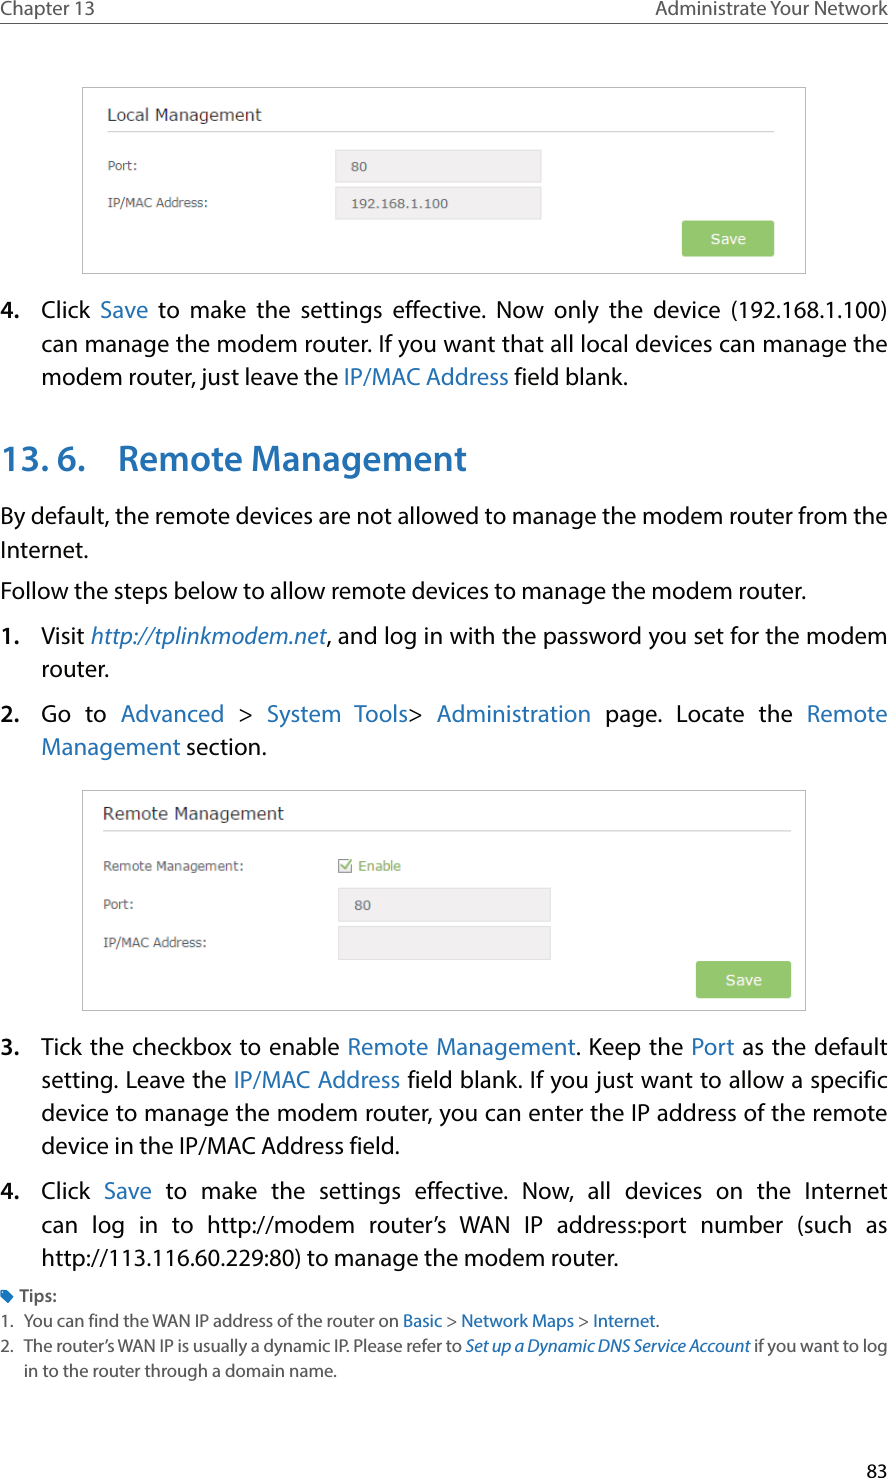 83Chapter 13 Administrate Your Network 4.  Click Save to make the settings effective. Now only the device (192.168.1.100) can manage the modem router. If you want that all local devices can manage the modem router, just leave the IP/MAC Address field blank.13. 6.  Remote ManagementBy default, the remote devices are not allowed to manage the modem router from the Internet. Follow the steps below to allow remote devices to manage the modem router.1.  Visit http://tplinkmodem.net, and log in with the password you set for the modem router.2.  Go to Advanced &gt;  System Tools&gt;  Administration  page. Locate the Remote Management section.3.  Tick the checkbox to enable Remote Management. Keep the Port as the default setting. Leave the IP/MAC Address field blank. If you just want to allow a specific device to manage the modem router, you can enter the IP address of the remote device in the IP/MAC Address field.4.  Click  Save to make the settings effective. Now, all devices on the Internet can log in to http://modem router’s WAN IP address:port number (such as http://113.116.60.229:80) to manage the modem router.Tips:1.  You can find the WAN IP address of the router on Basic &gt; Network Maps &gt; Internet.2.  The router’s WAN IP is usually a dynamic IP. Please refer to Set up a Dynamic DNS Service Account if you want to log in to the router through a domain name.